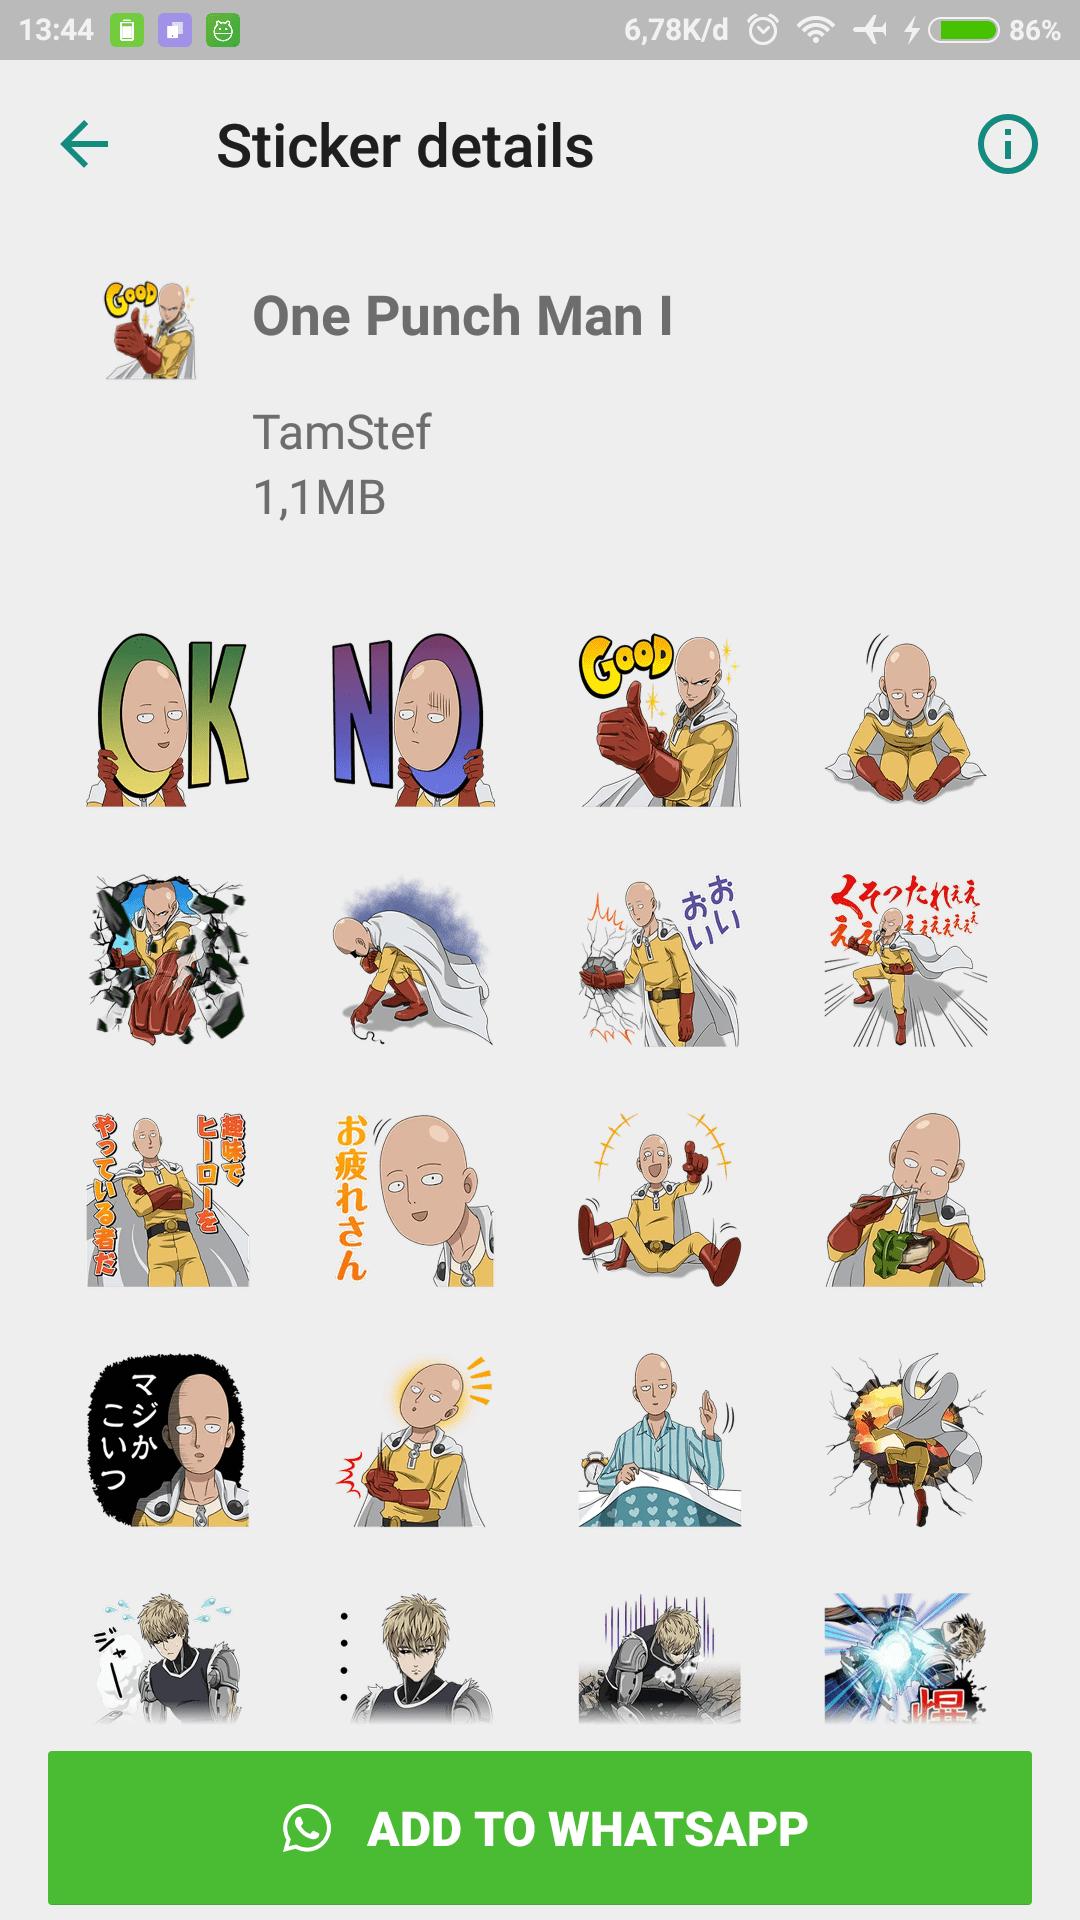 Xd83cxddefxd83cxddf5anime Sticker Wastickerapps For Android Apk Download